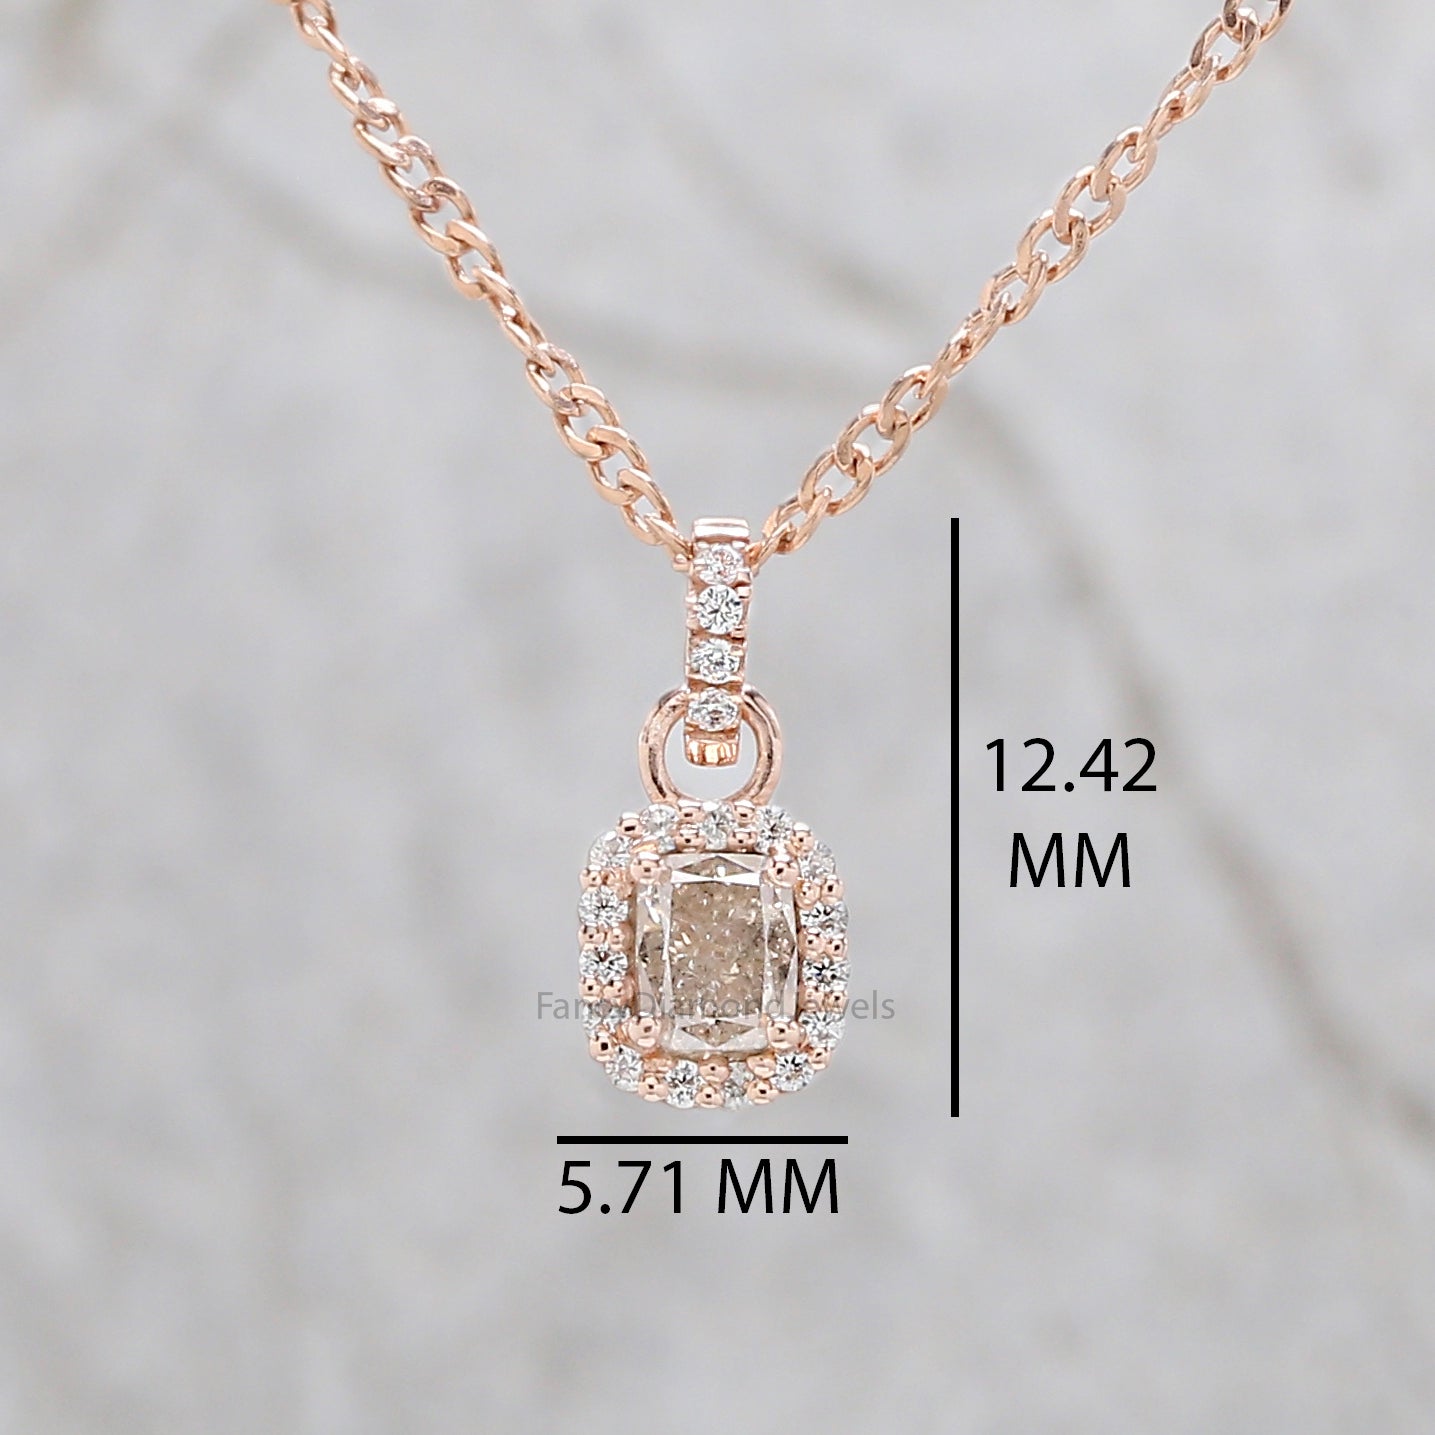 Cushion Cut Grey Color Diamond Pendant 0.36 Ct 4.60 MM Cushion Diamond Pendant 14K Rose Gold Silver Engagement Pendant Gift For Her QN8711